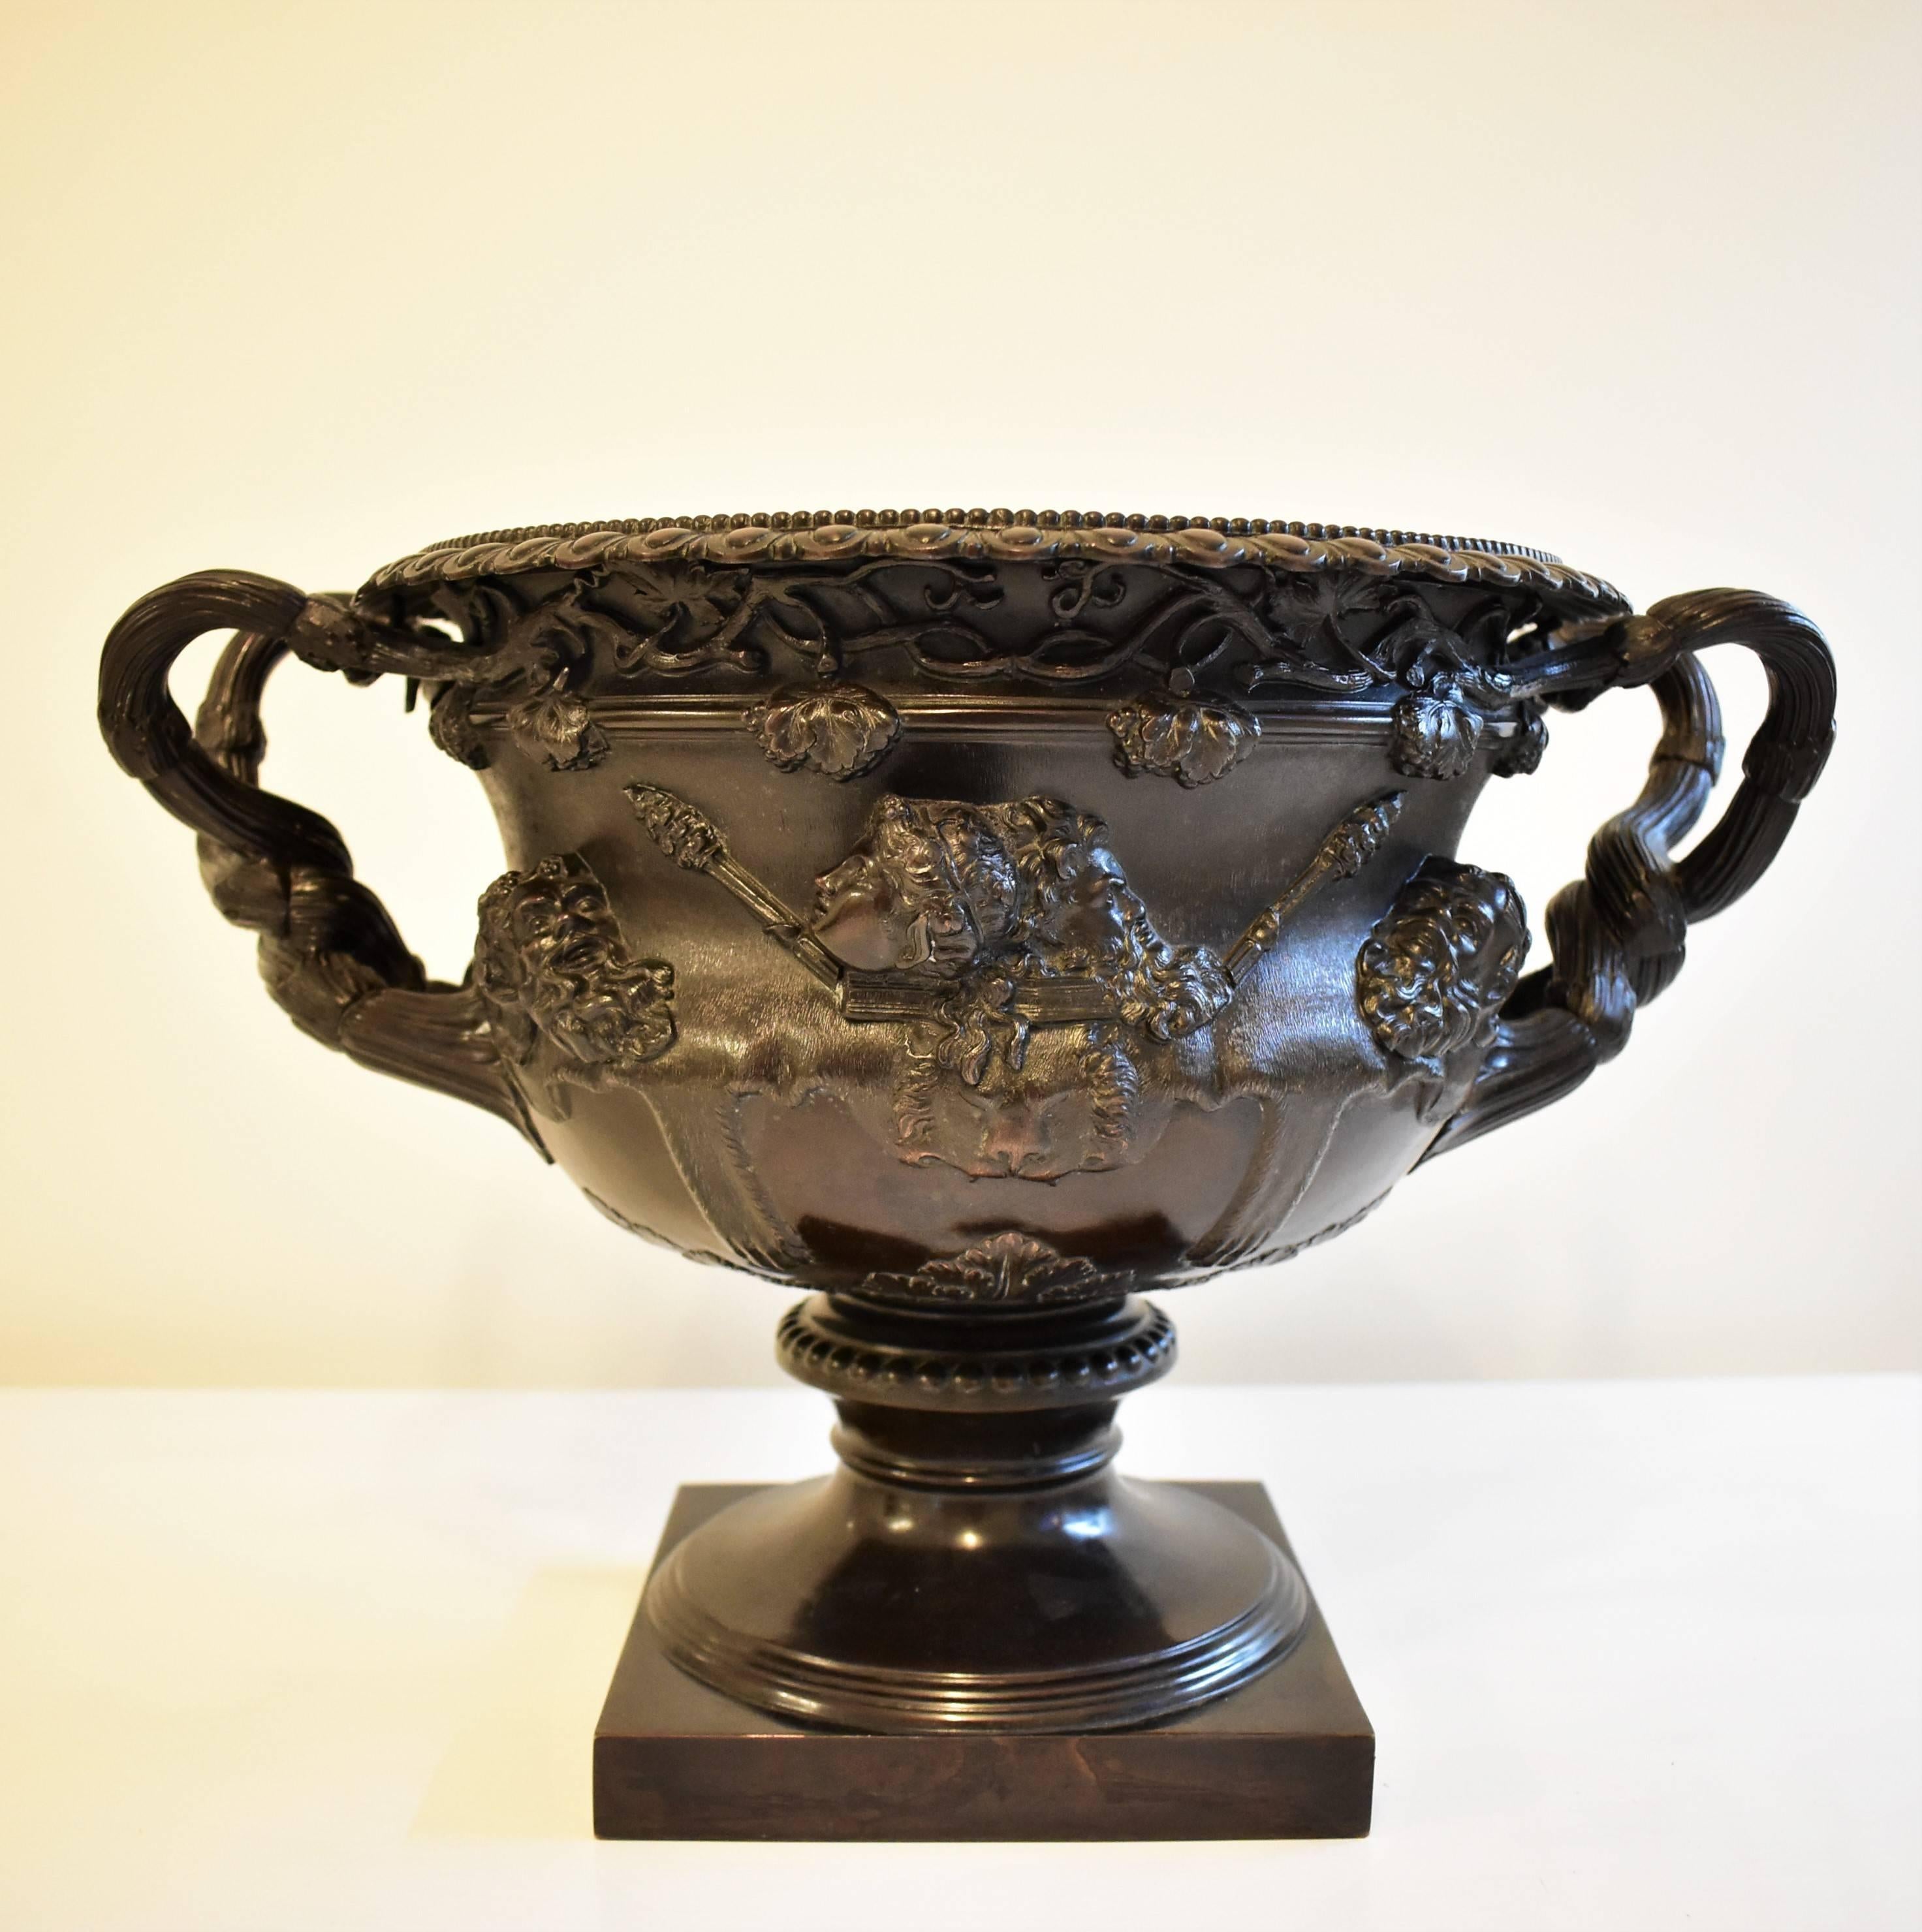 Bronze Warwick vase in perfect condition with classical motifs vines, faces, profiles. weighs 3000 grs. diameter 30 cm, with handles width 40 cm. Manufactured by Dobson & Sons London, pictured. The vase has a square bronze foot and an additional